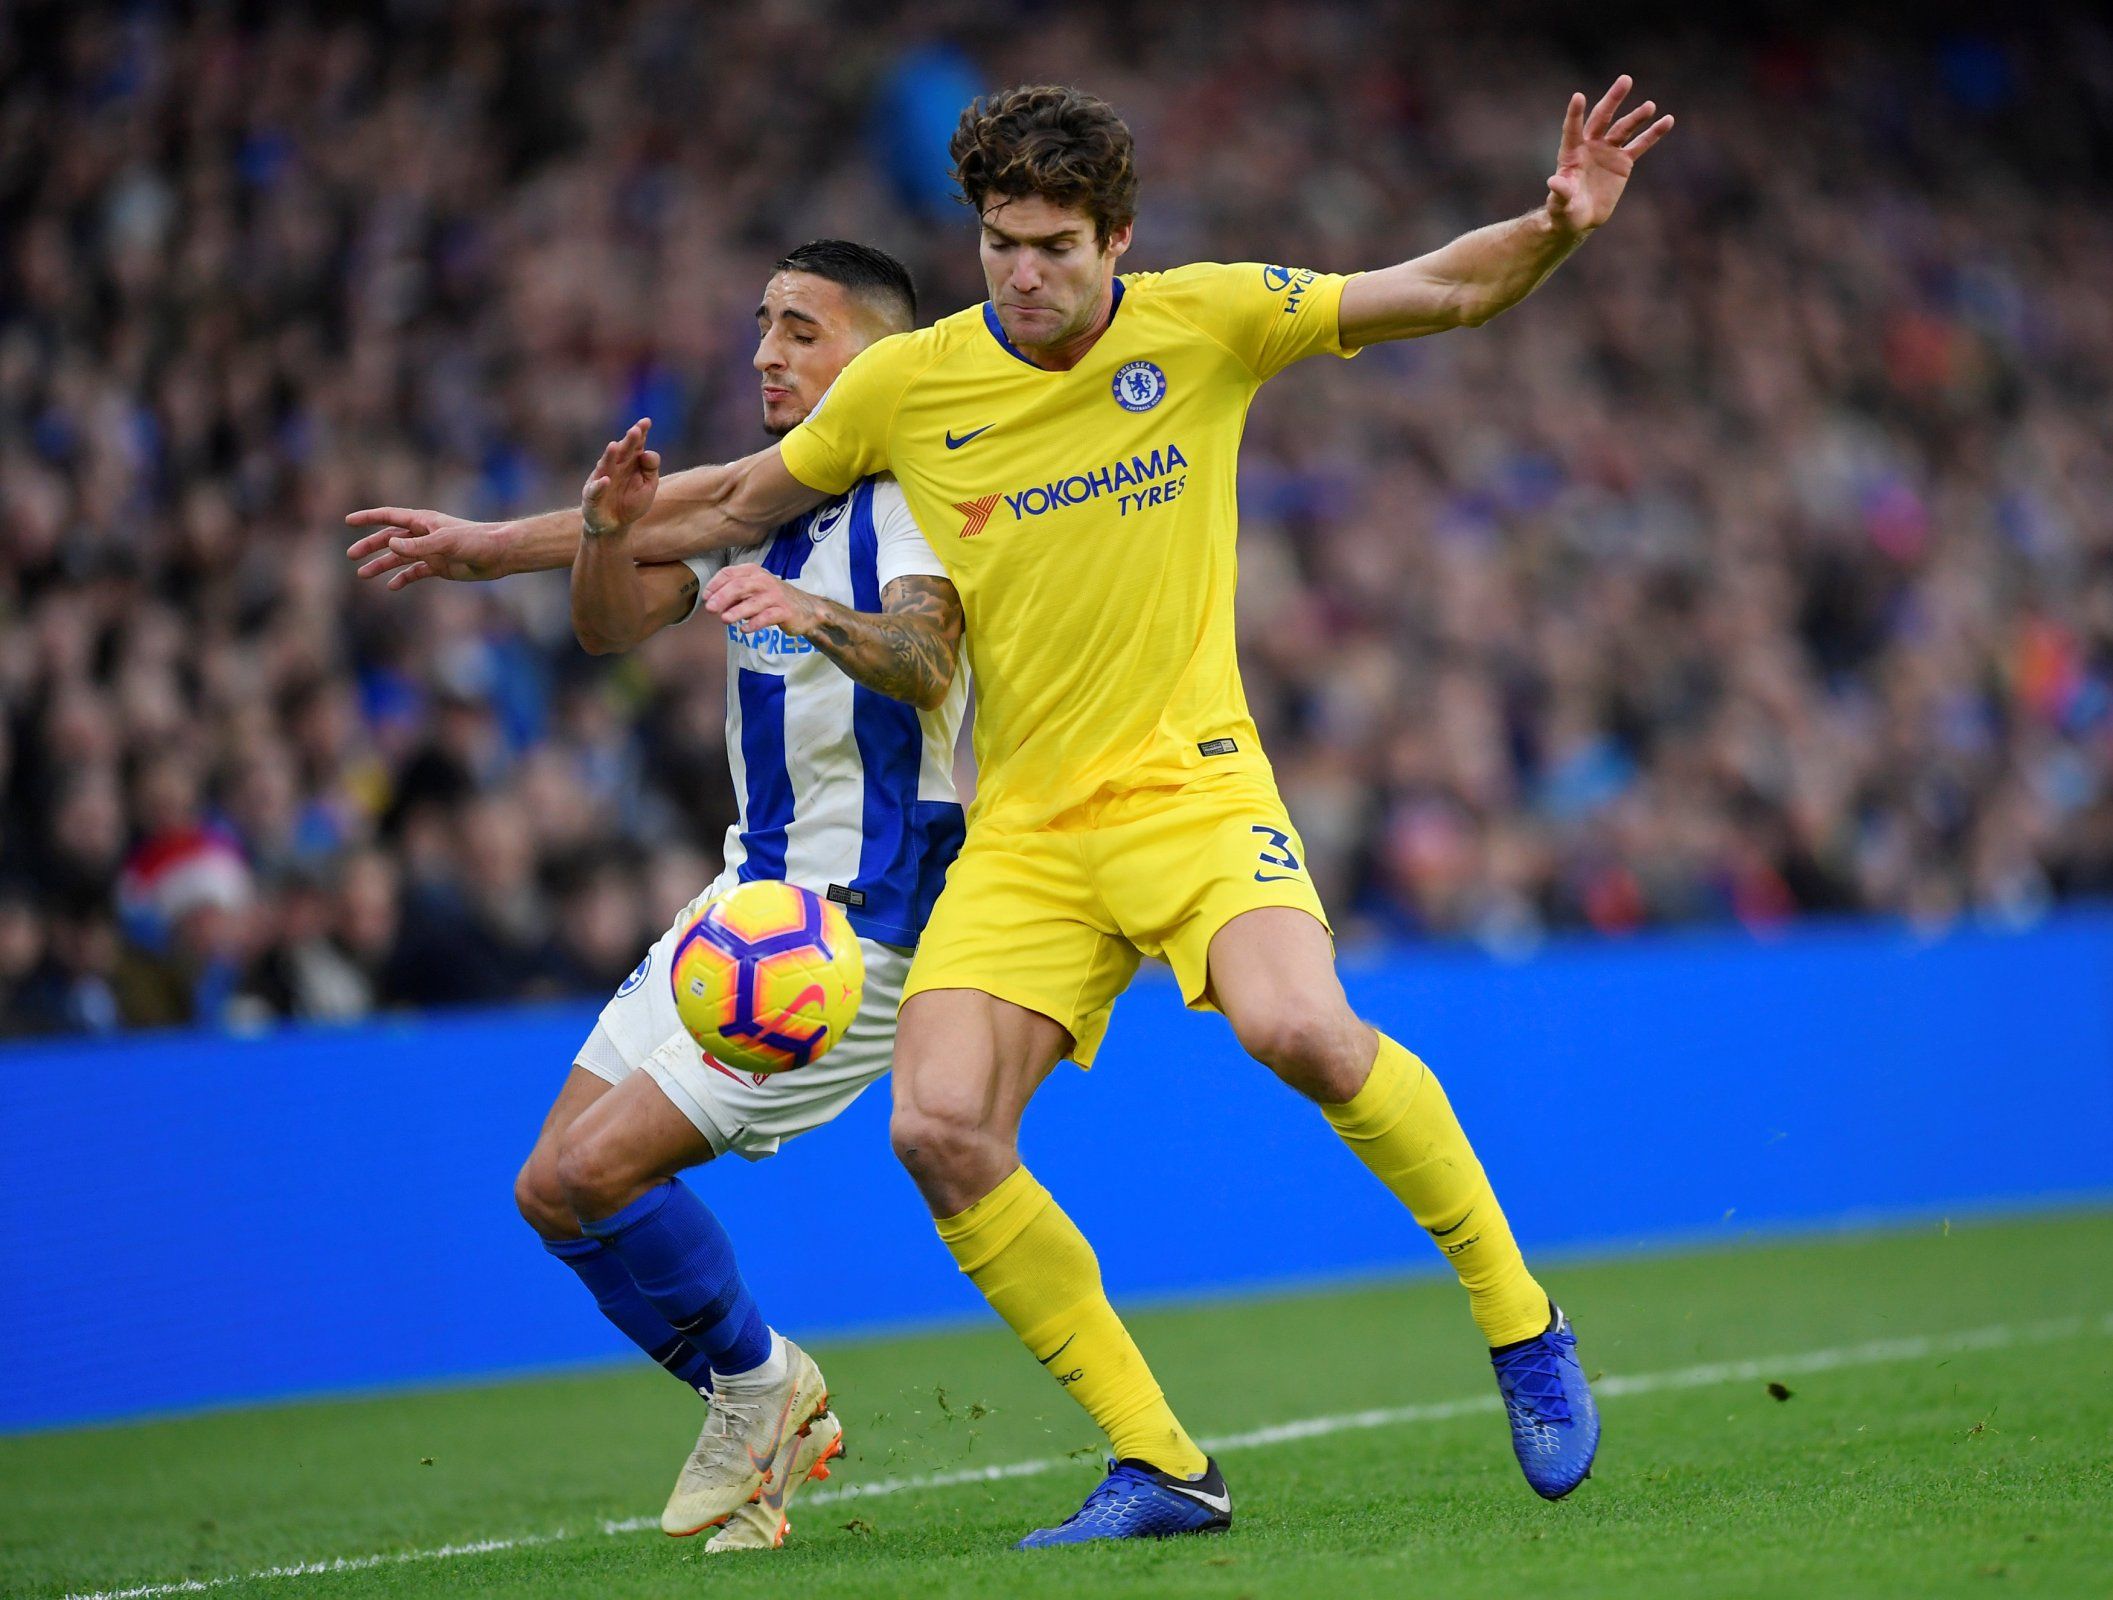 Marcos Alonso in action for Chelsea